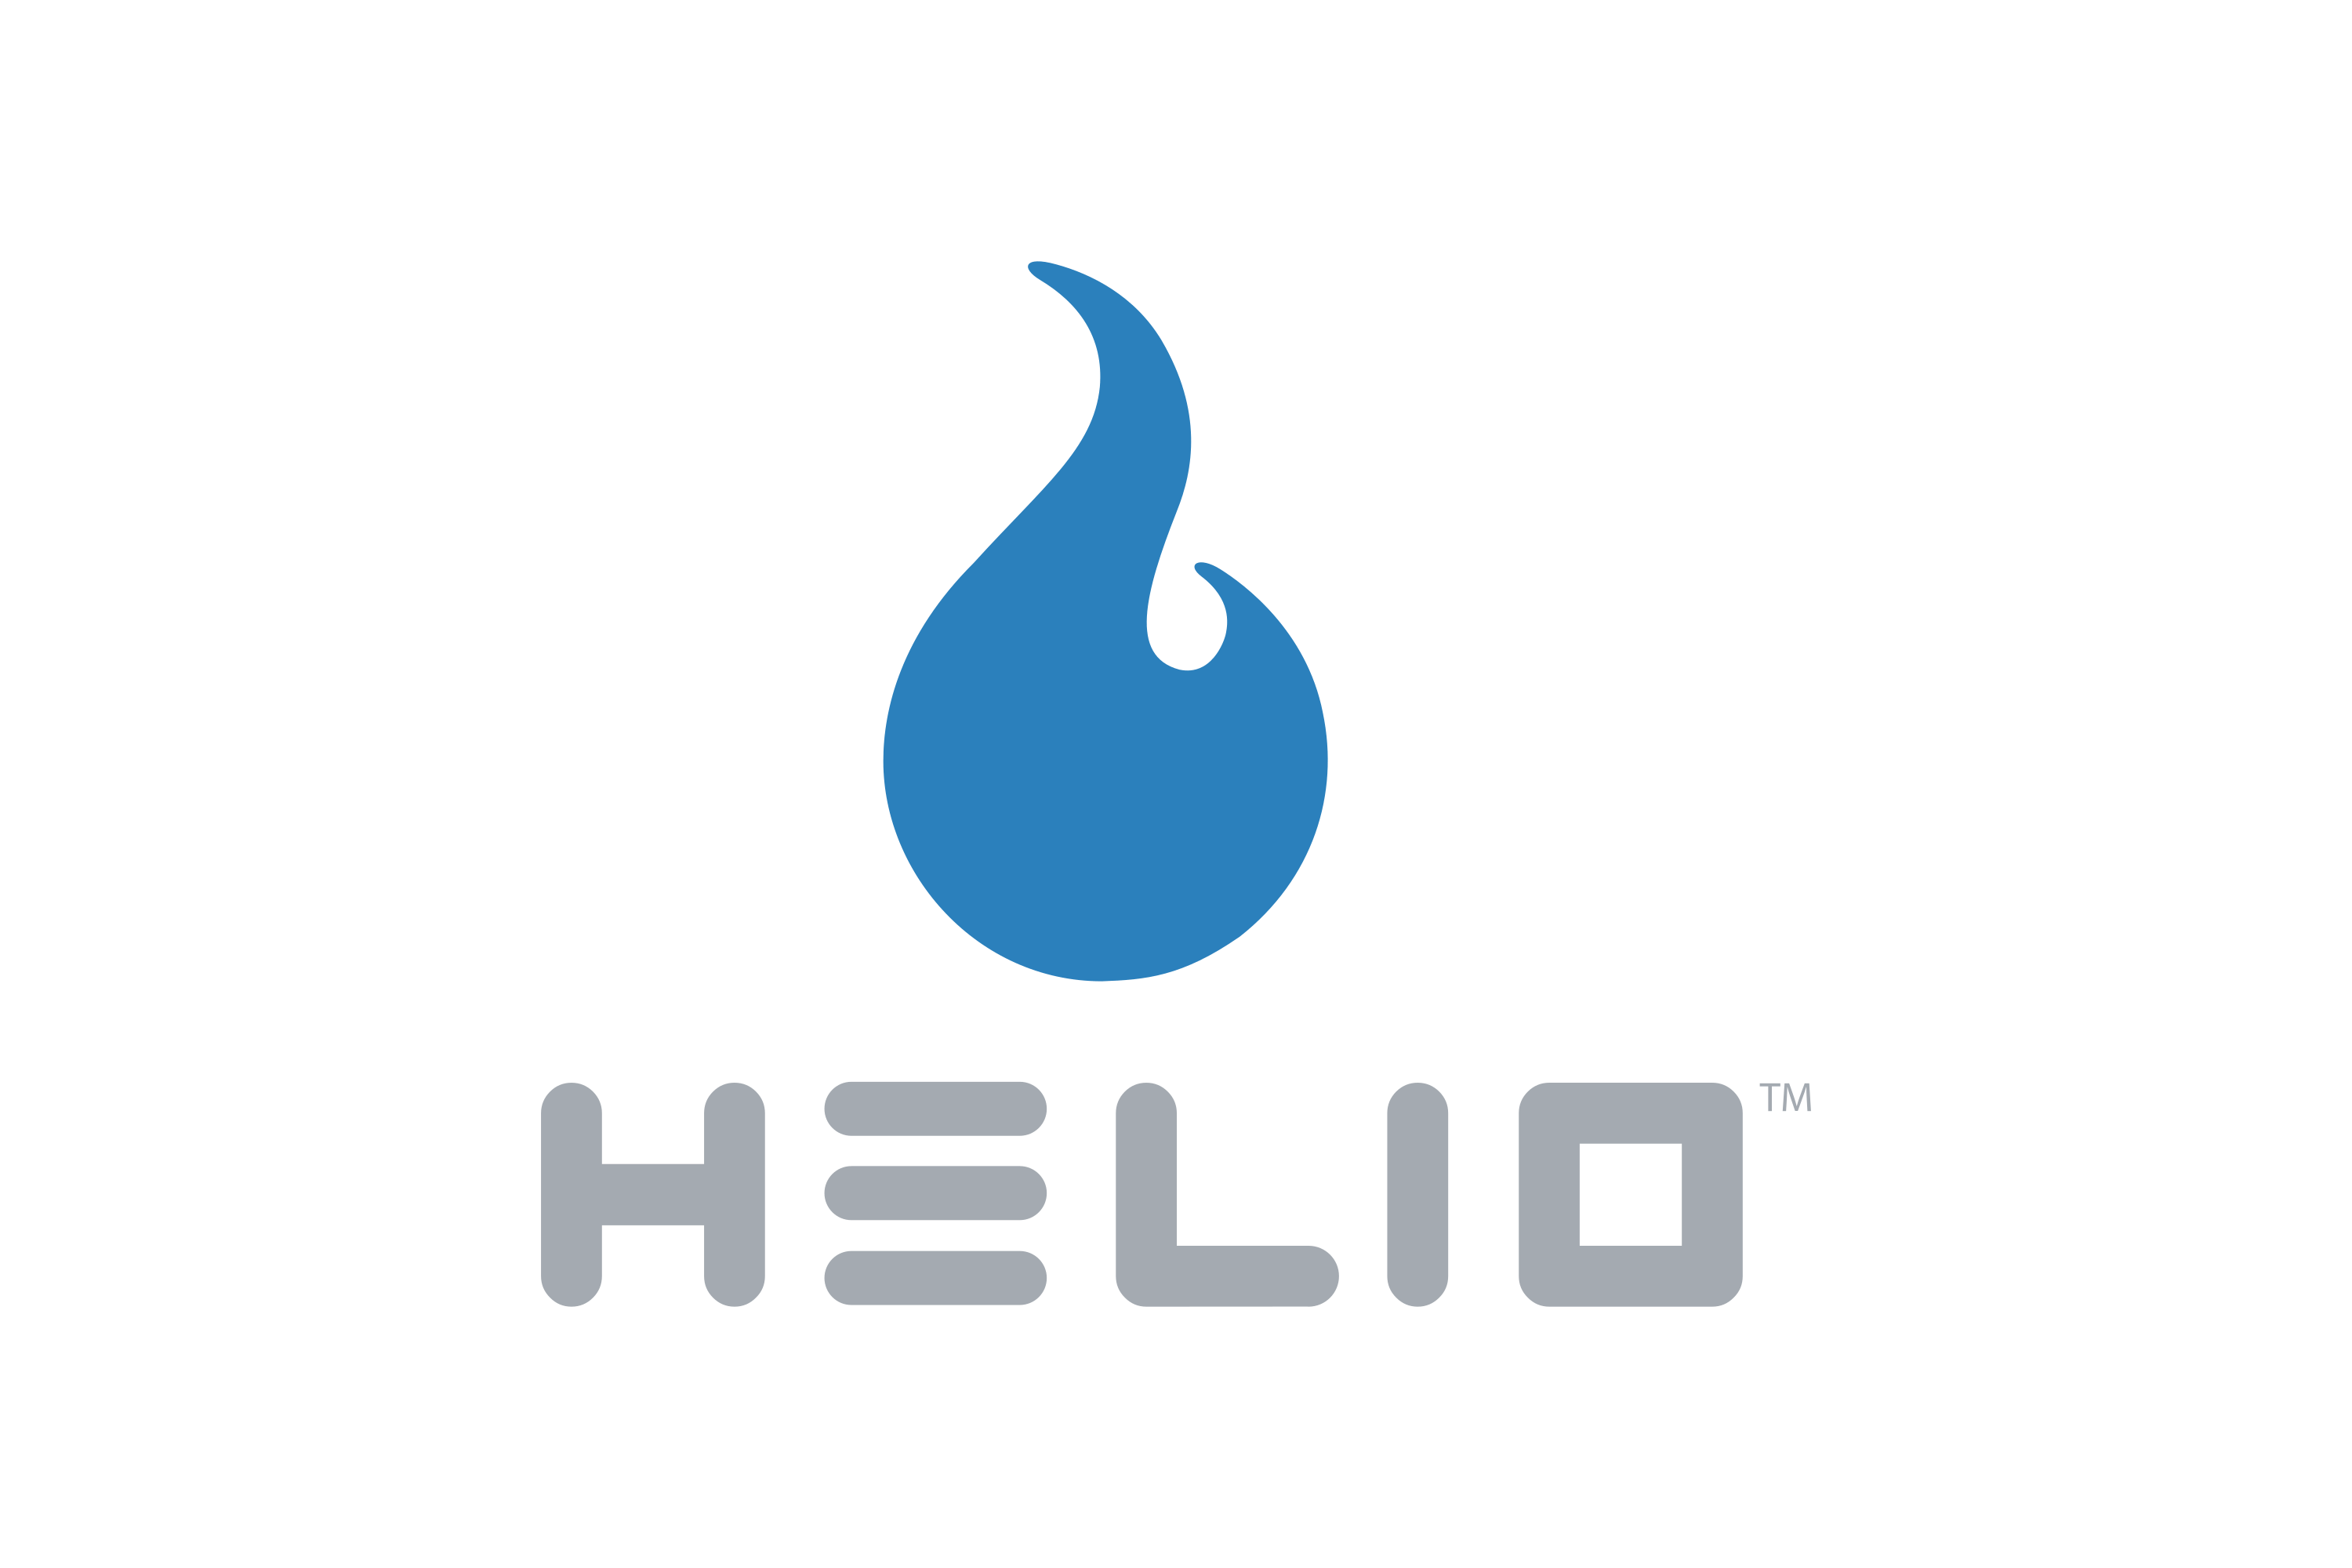 Download Helio Logo in SVG Vector or PNG File Format - Logo.wine